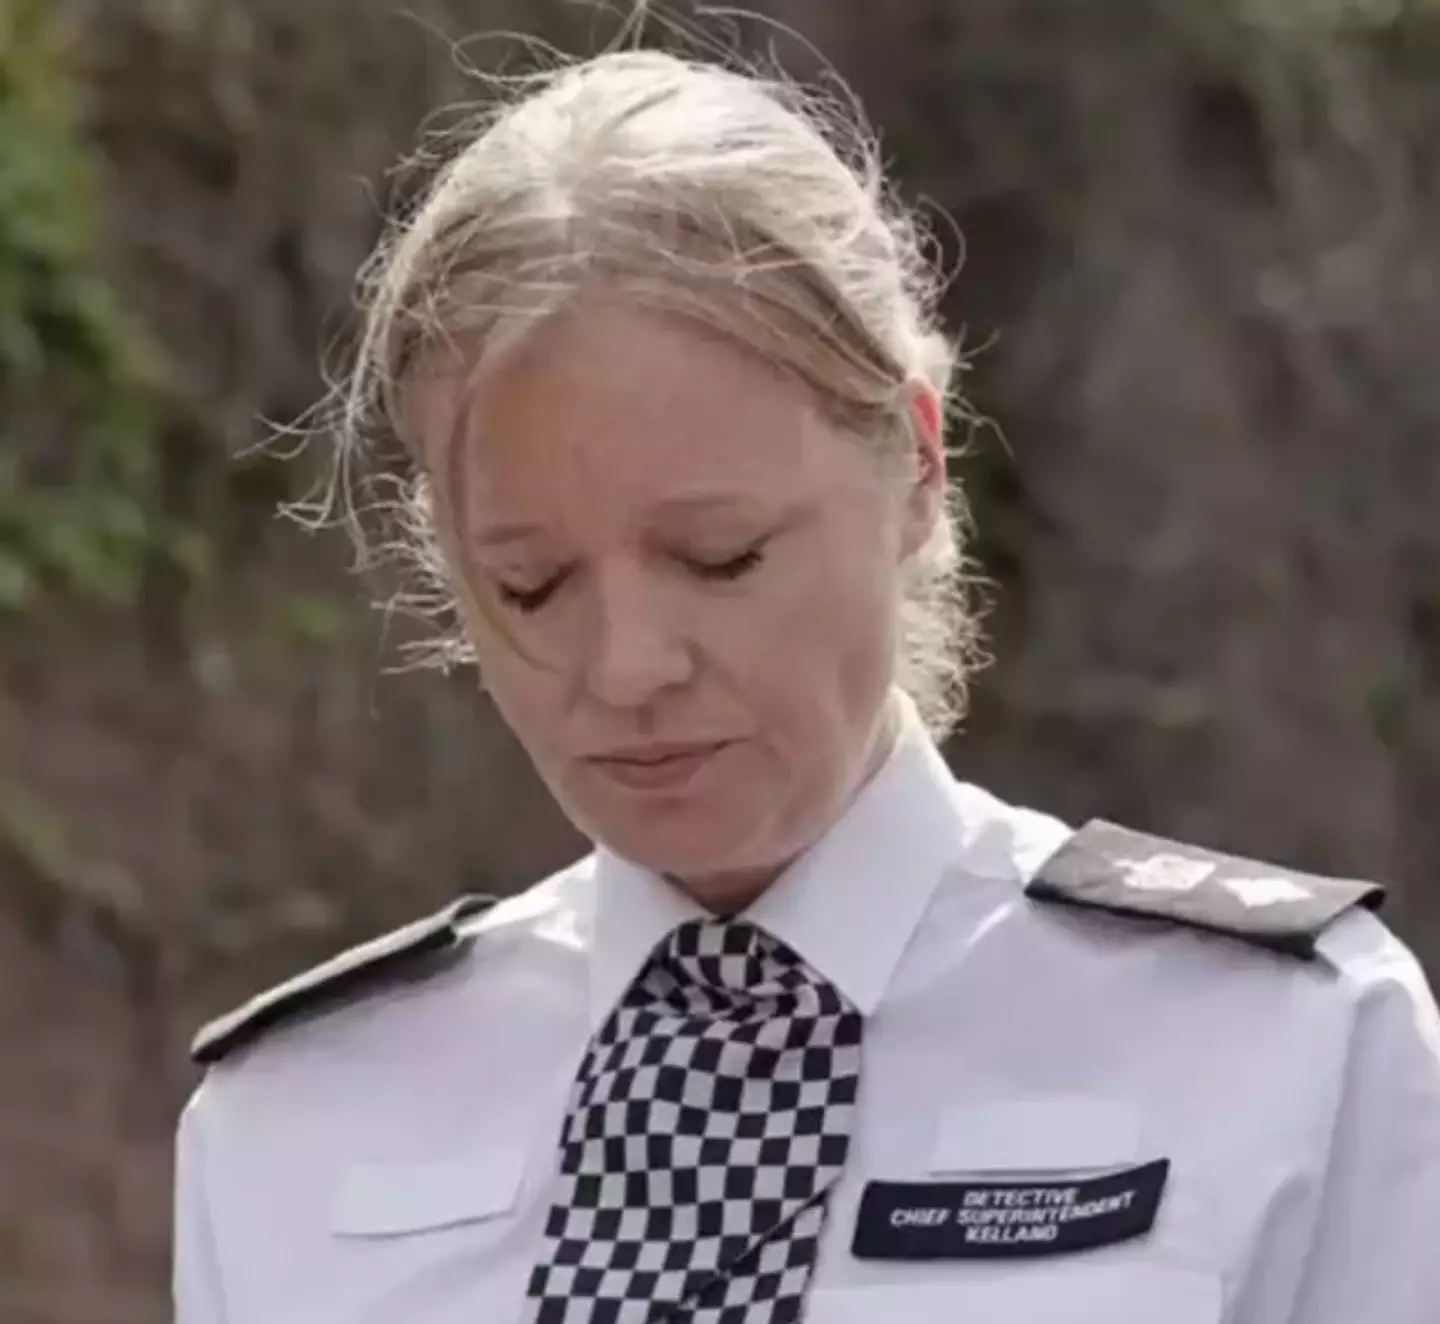 Detective Chief Superintendent Clair Kelland was visibly emotional as she read the statement.